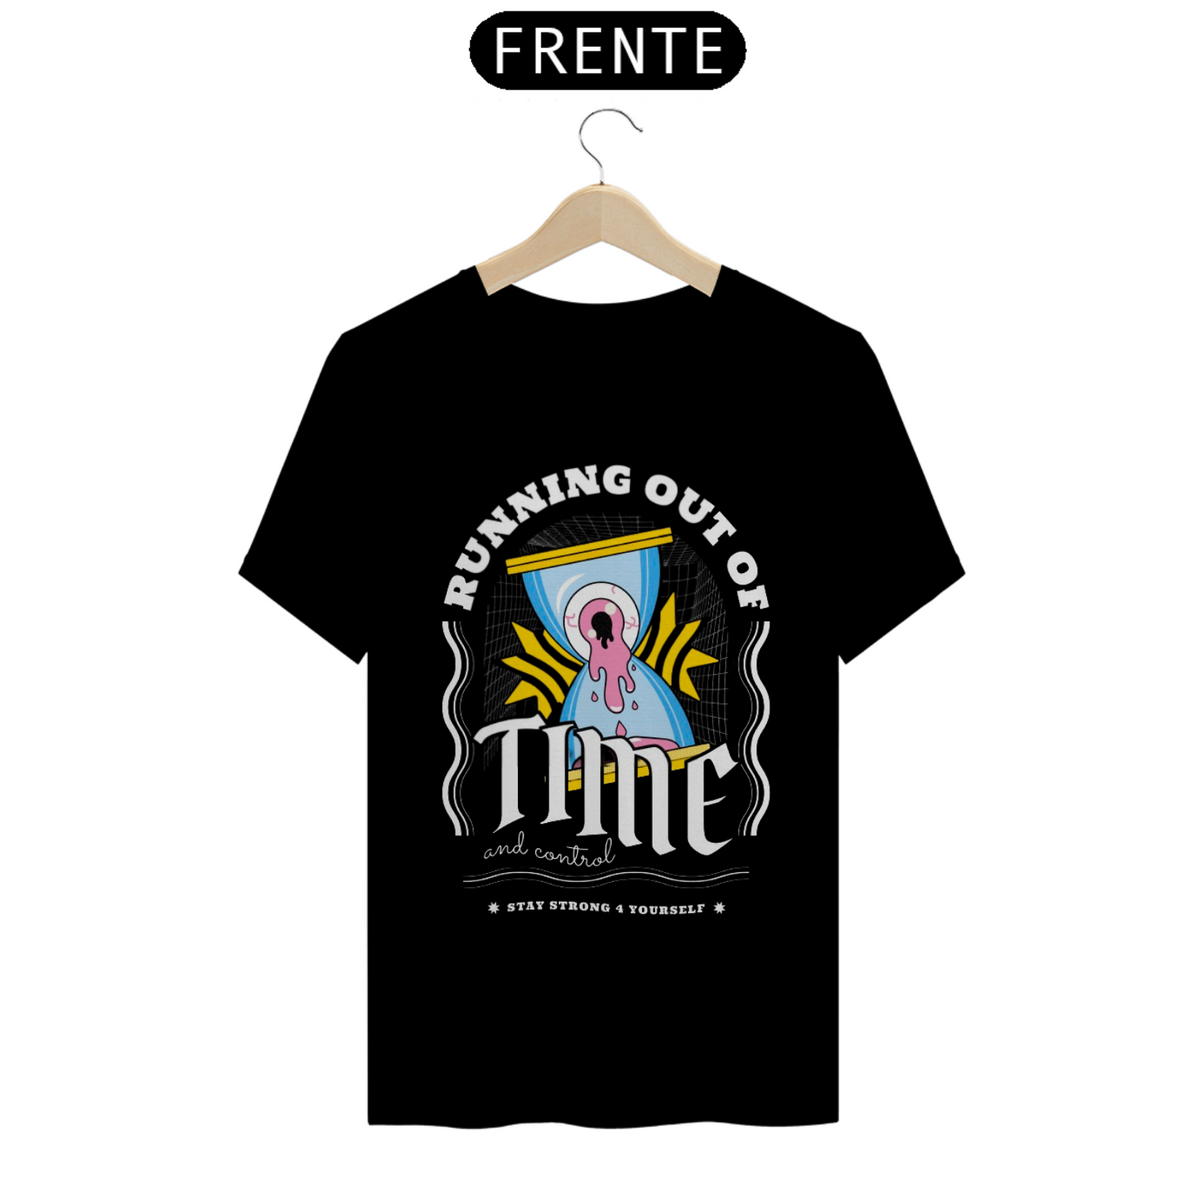 Nome do produto: Camisa Running out of Time